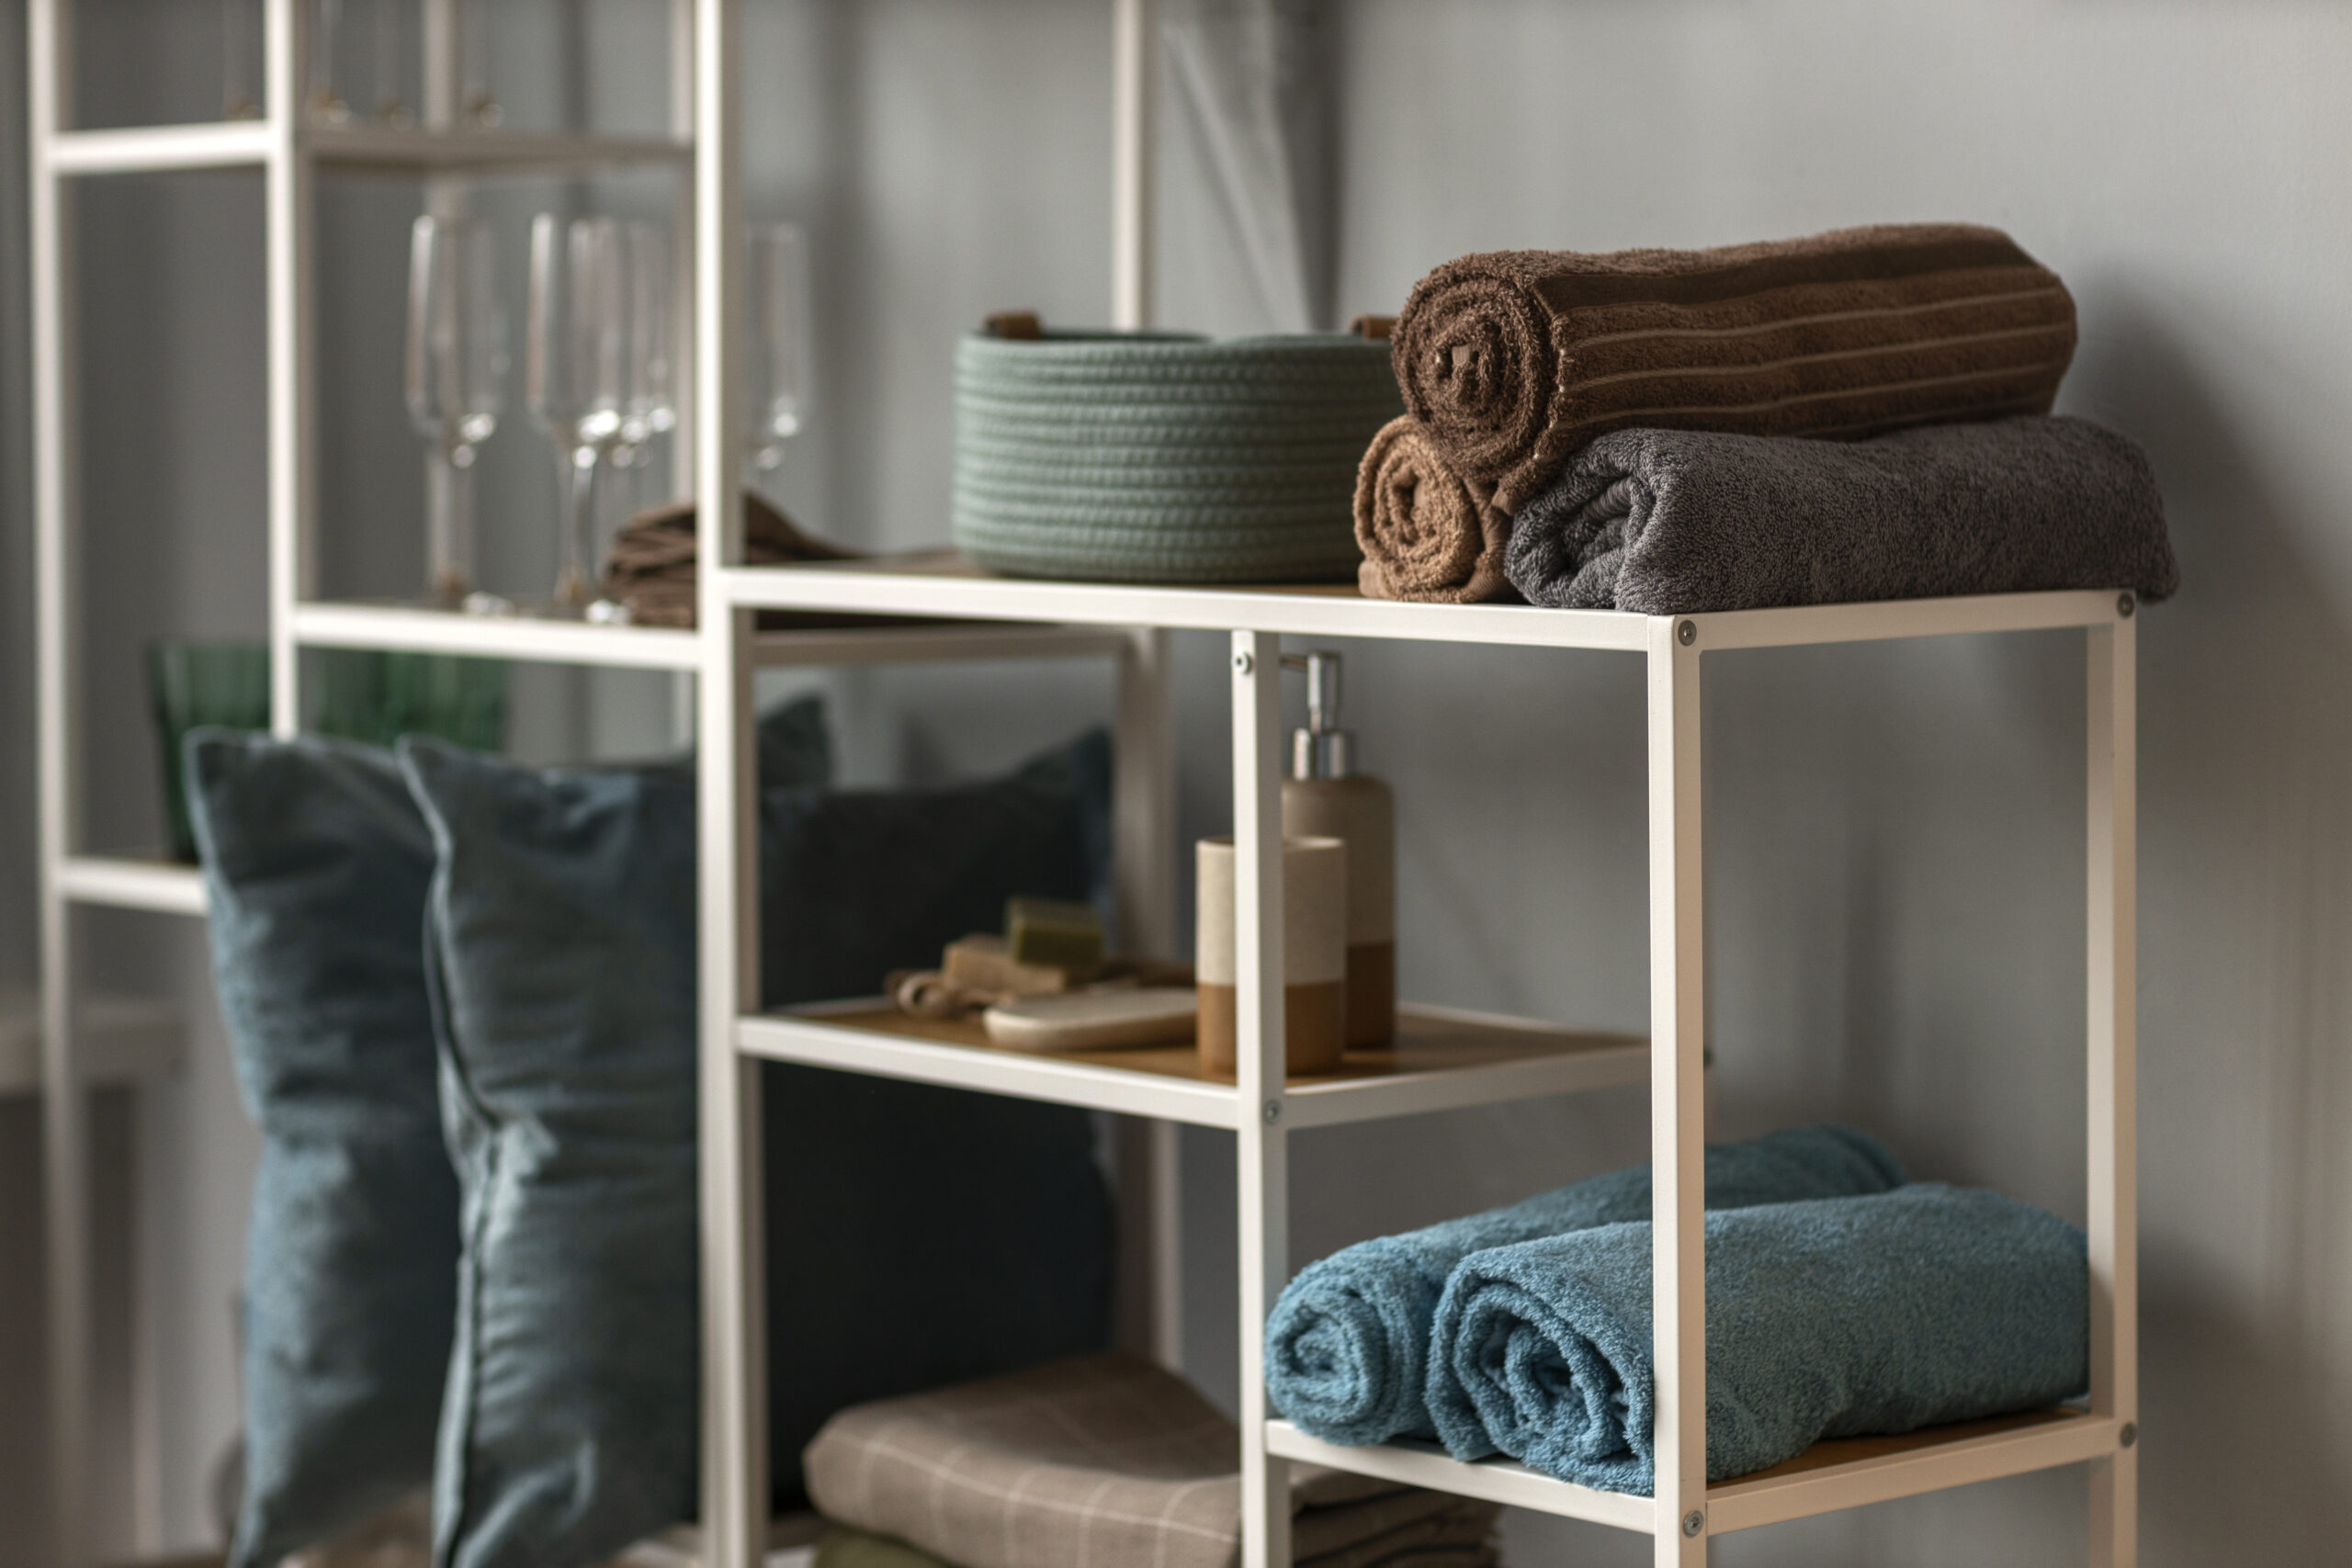 Towel Rack: Adding Organization and Style to Your Bathroom